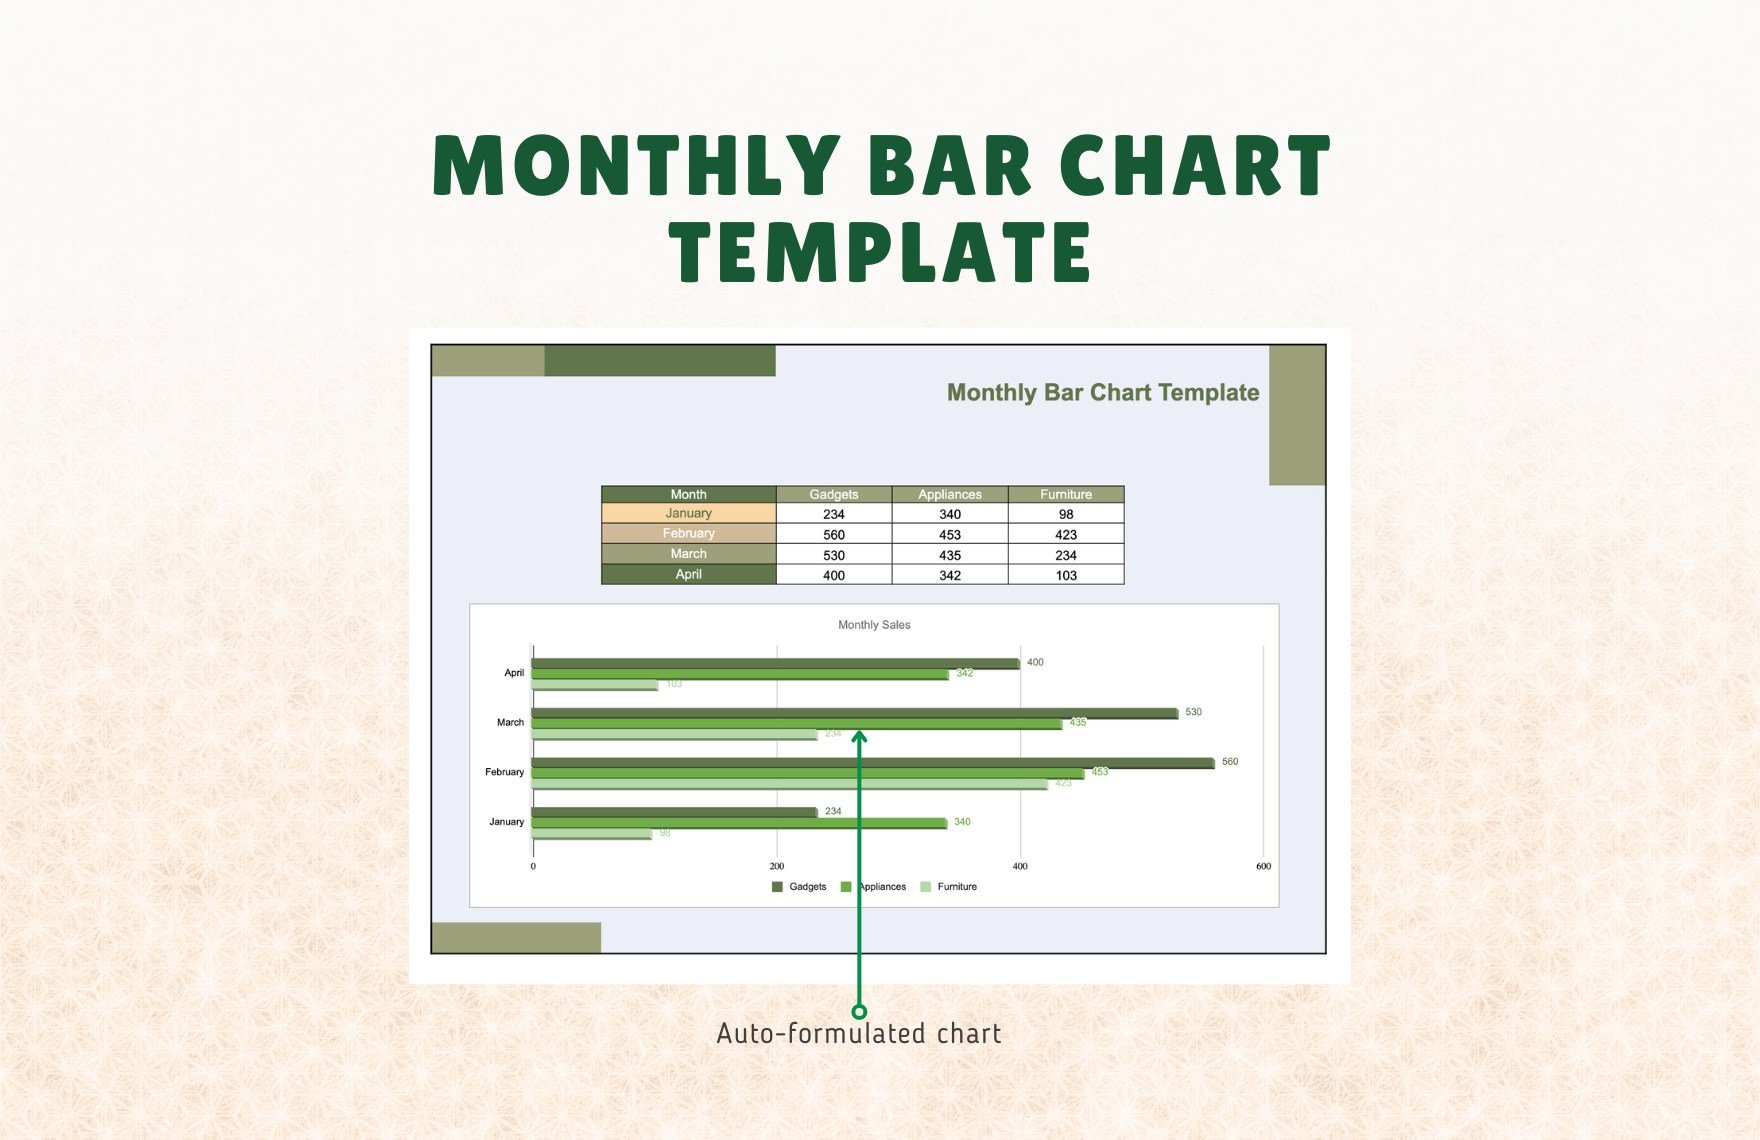 Monthly Bar Chart Template